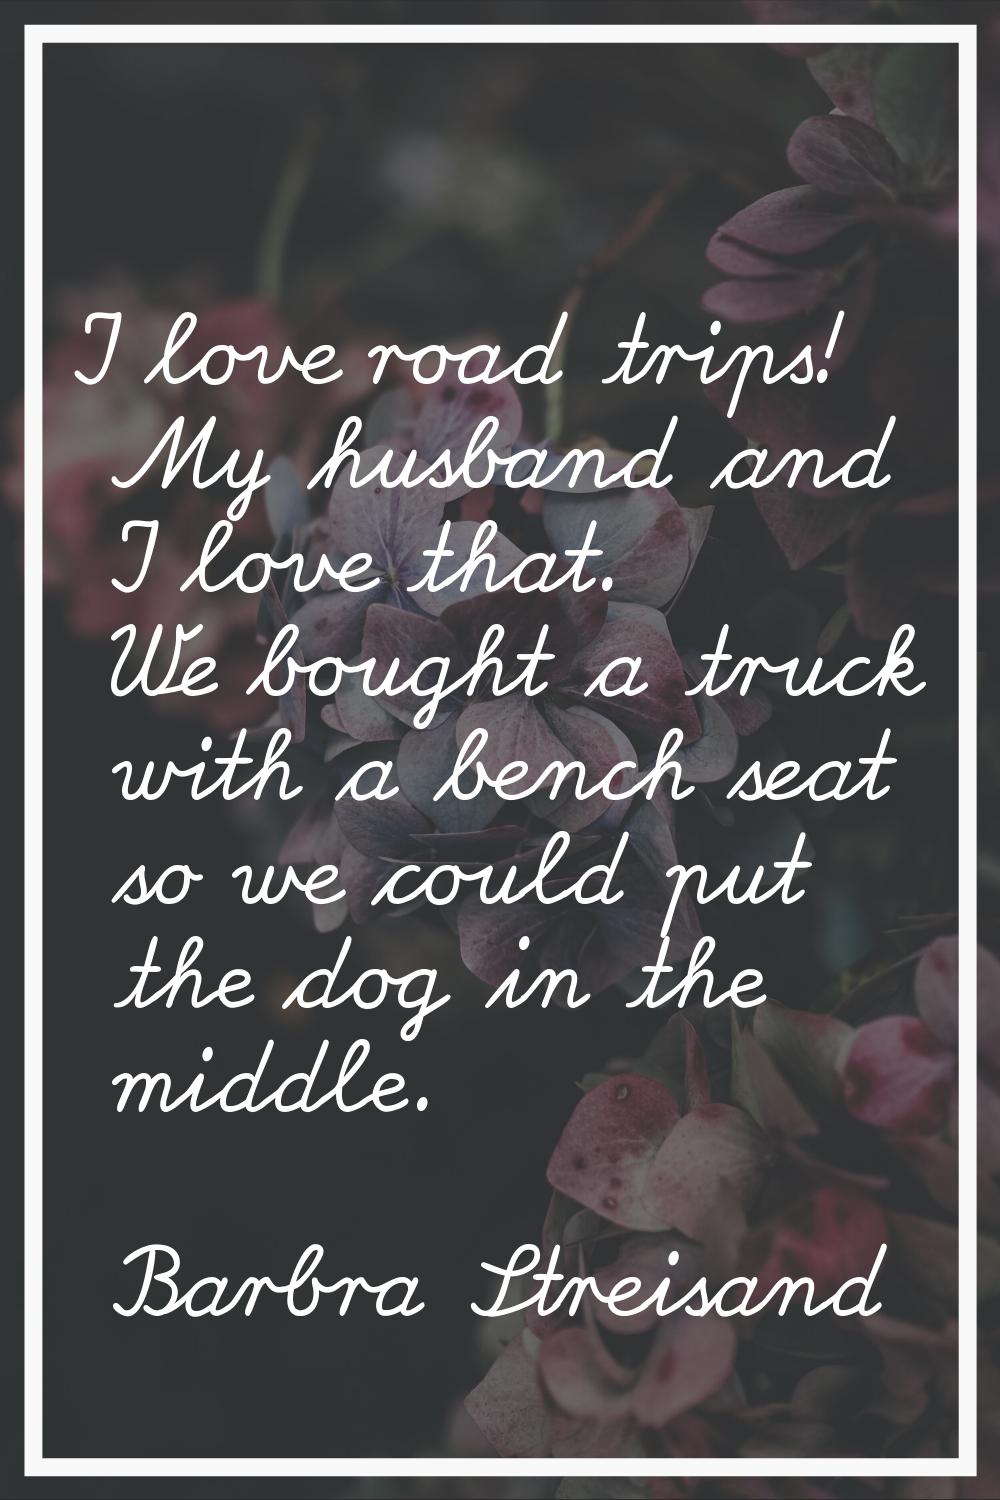 I love road trips! My husband and I love that. We bought a truck with a bench seat so we could put 